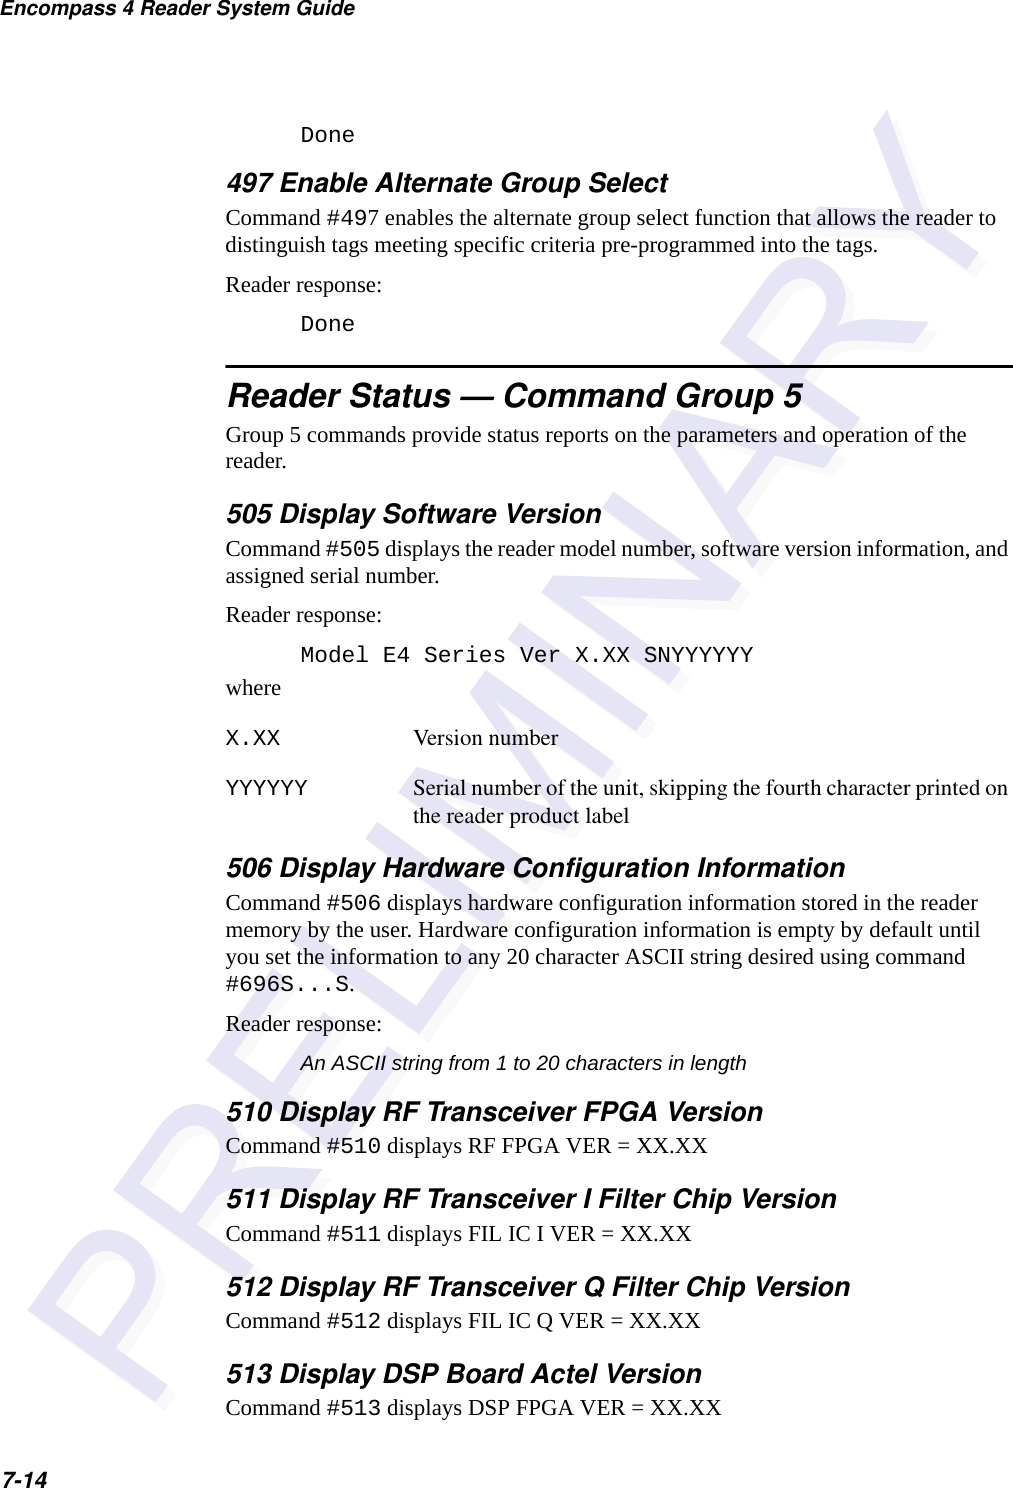 Encompass 4 Reader System Guide7-14Done497 Enable Alternate Group SelectCommand #497 enables the alternate group select function that allows the reader to distinguish tags meeting specific criteria pre-programmed into the tags.Reader response:Done  Reader Status — Command Group 5Group 5 commands provide status reports on the parameters and operation of the reader.505 Display Software VersionCommand #505 displays the reader model number, software version information, and assigned serial number. Reader response:Model E4 Series Ver X.XX SNYYYYYYwhereX.XX Version numberYYYYYY Serial number of the unit, skipping the fourth character printed on the reader product label506 Display Hardware Configuration InformationCommand #506 displays hardware configuration information stored in the reader memory by the user. Hardware configuration information is empty by default until you set the information to any 20 character ASCII string desired using command #696S...S.Reader response: An ASCII string from 1 to 20 characters in length510 Display RF Transceiver FPGA VersionCommand #510 displays RF FPGA VER = XX.XX511 Display RF Transceiver I Filter Chip VersionCommand #511 displays FIL IC I VER = XX.XX512 Display RF Transceiver Q Filter Chip VersionCommand #512 displays FIL IC Q VER = XX.XX513 Display DSP Board Actel VersionCommand #513 displays DSP FPGA VER = XX.XX